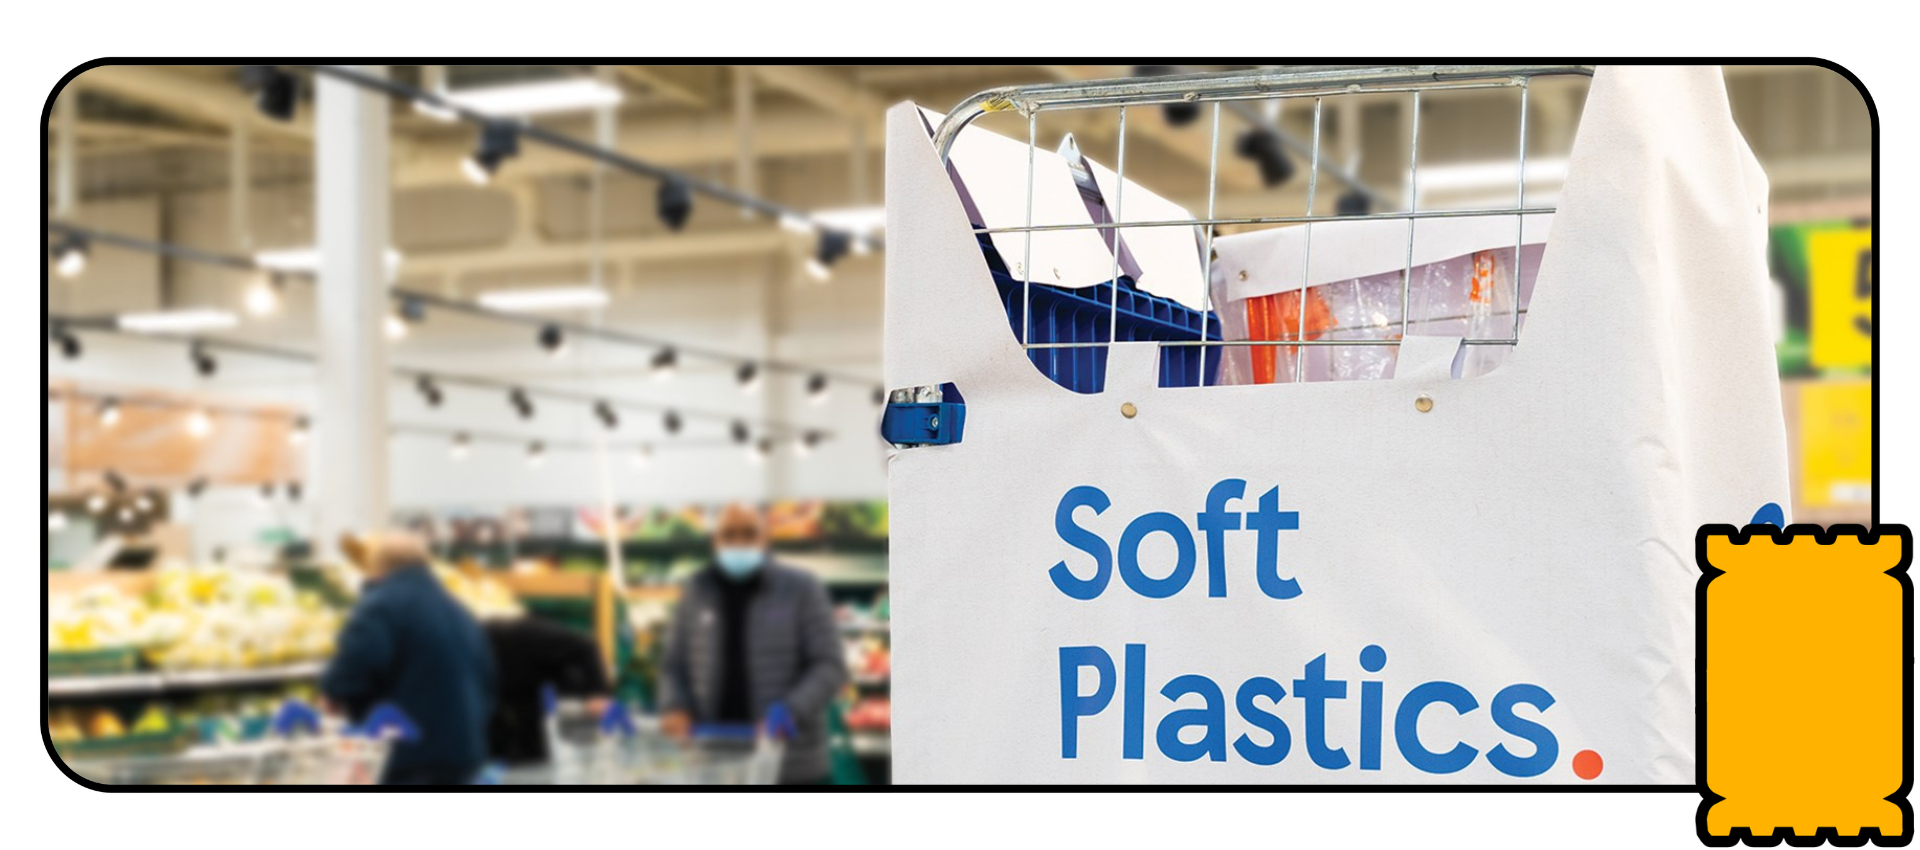 Soft plastic recycling: Don't believe the hype